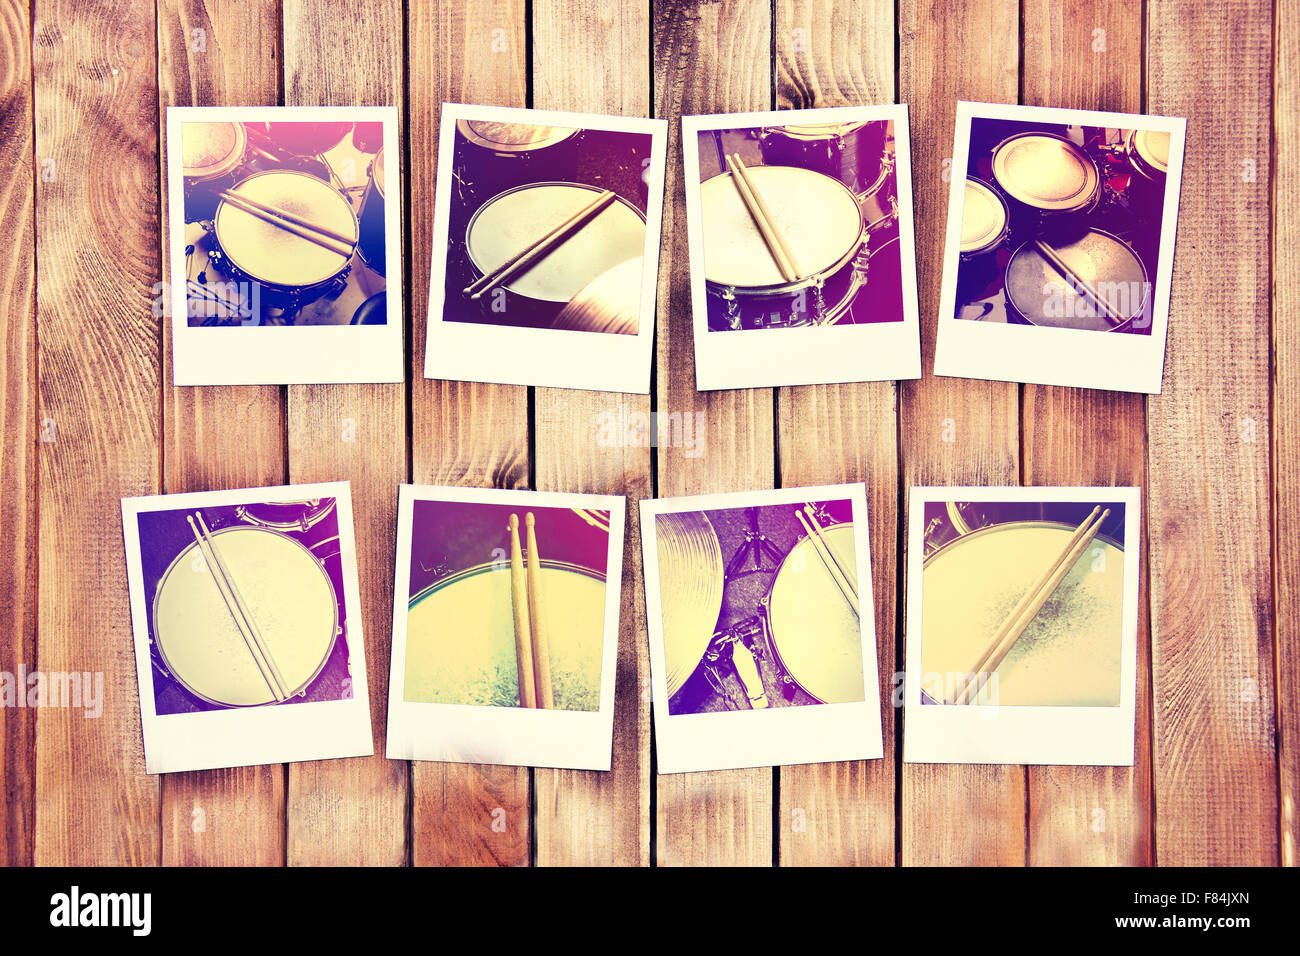 Page 3 - Polaroid Frames High Resolution Stock Photography and Images -  Alamy